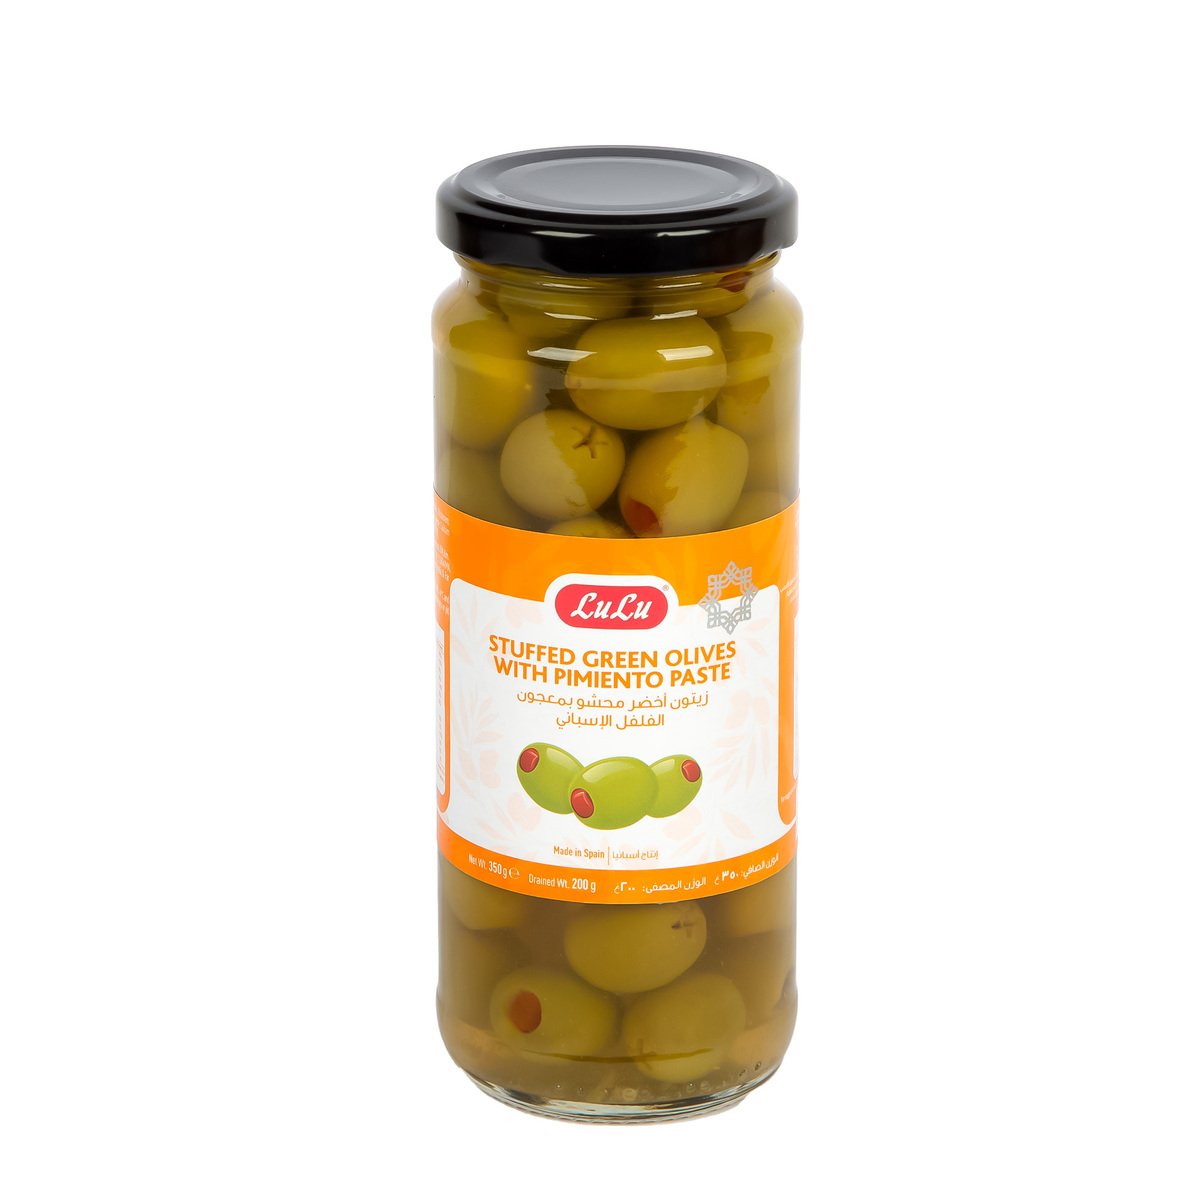 LuLu Stuffed Green Olives With Pimento Paste 200g